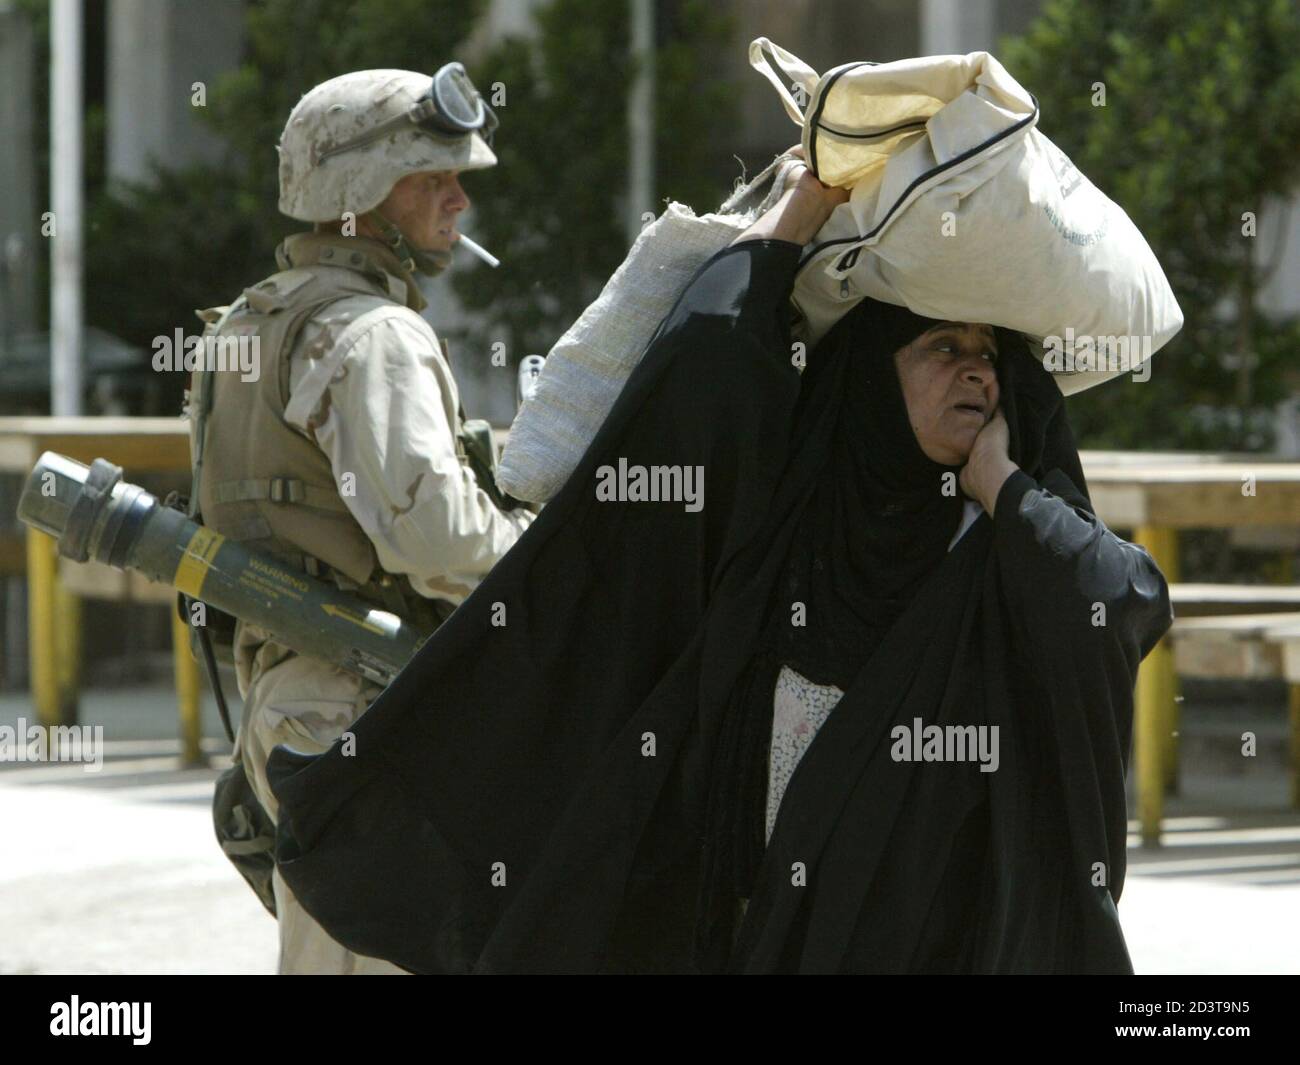 An Iraqi woman walks past a U.S. Marine from Lima Company, a part of a 7th Marine Regiment, as the unit patrols in the northern part of Iraqi capital Baghdad April 10, 2003. U.S. forces in Iraq grappled with looting and civil disorder, scattered gun fights and a suicide bomb attack that took American lives on thursday, one day after the euphoria that marked the end of Saddam Hussein's rule. PP03040034   REUTERS/Oleg Popov  OP/GB Stock Photo